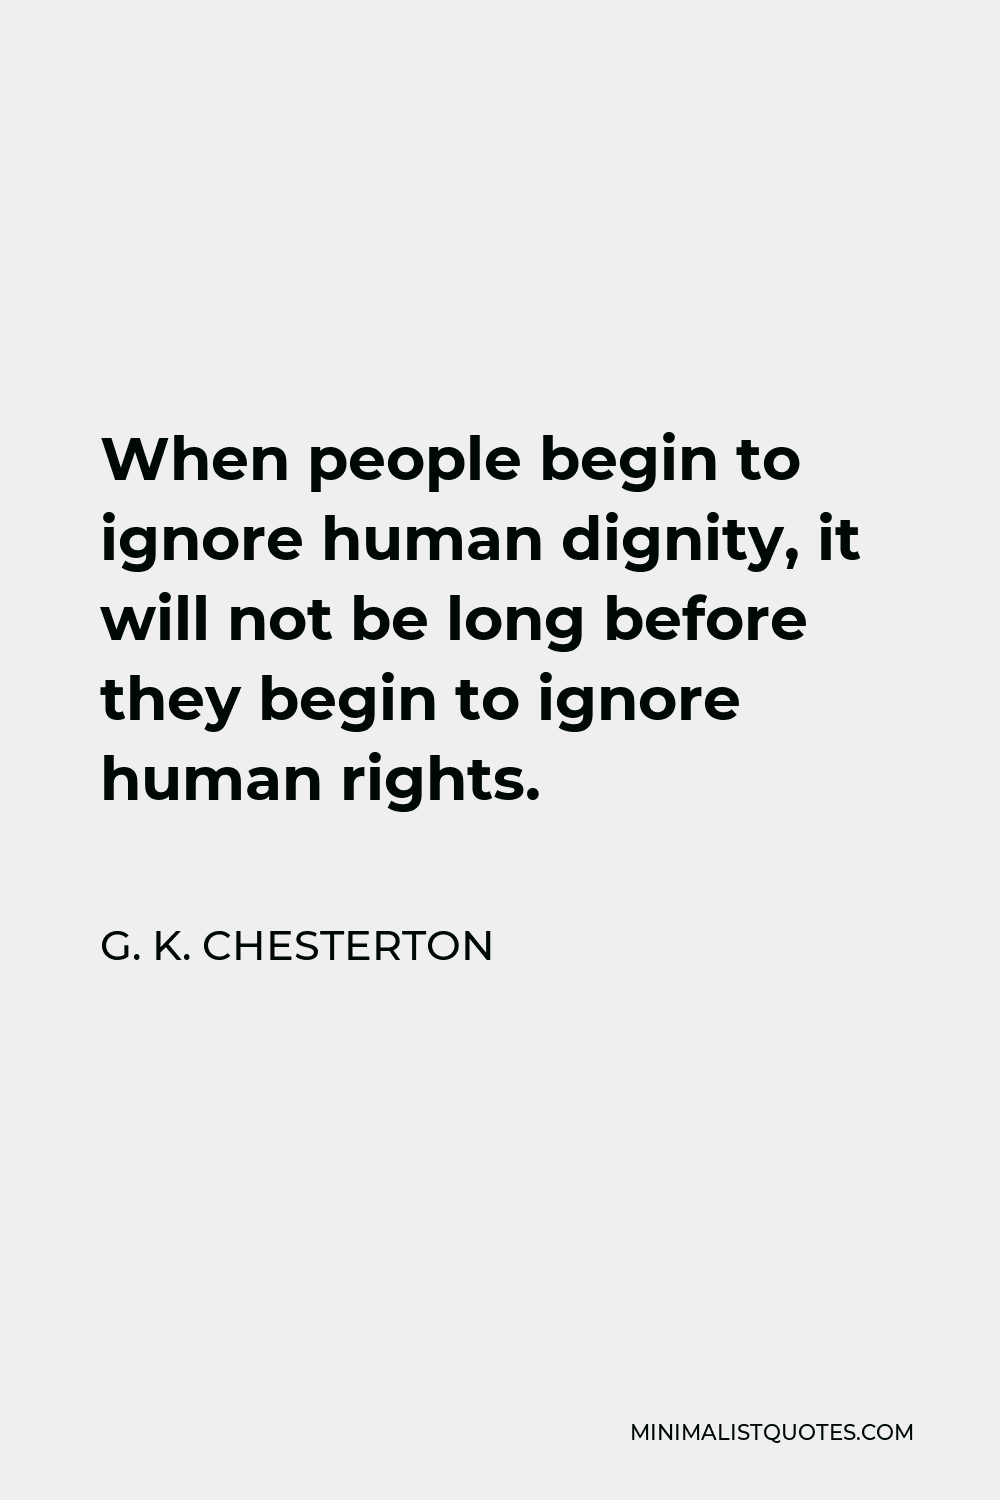 G. K. Chesterton Quote - When people begin to ignore human dignity, it will not be long before they begin to ignore human rights.